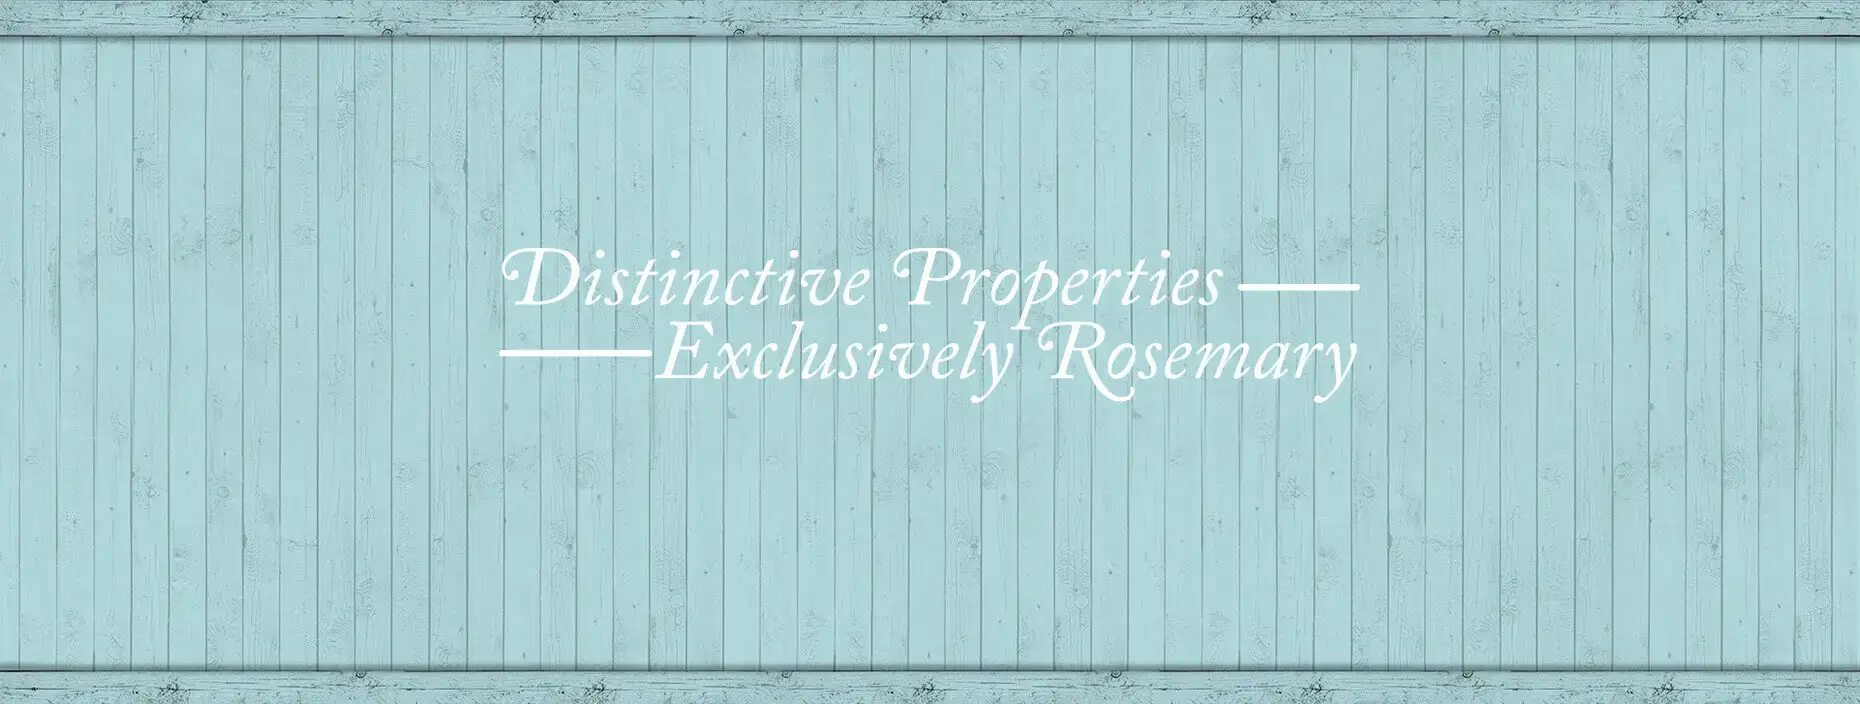 Distinctive Properties Exclusively Rosemary